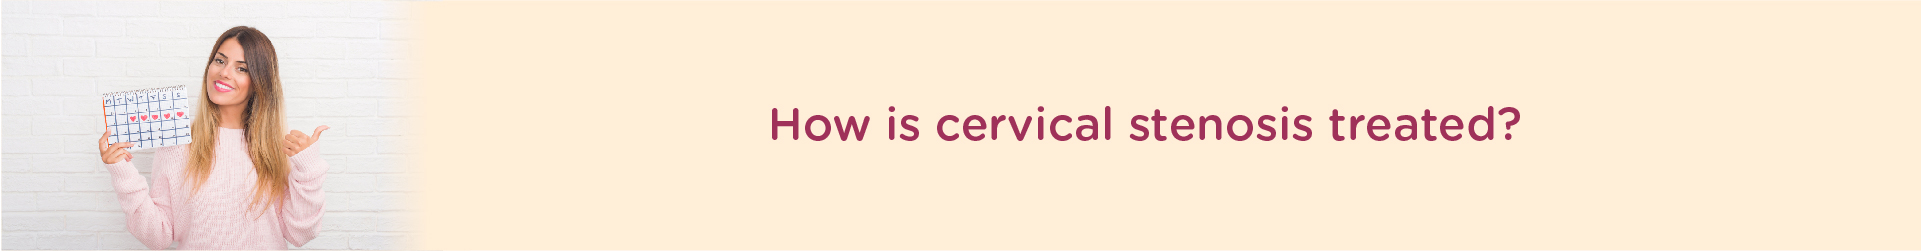 How Is Cervical Stenosis Treated?